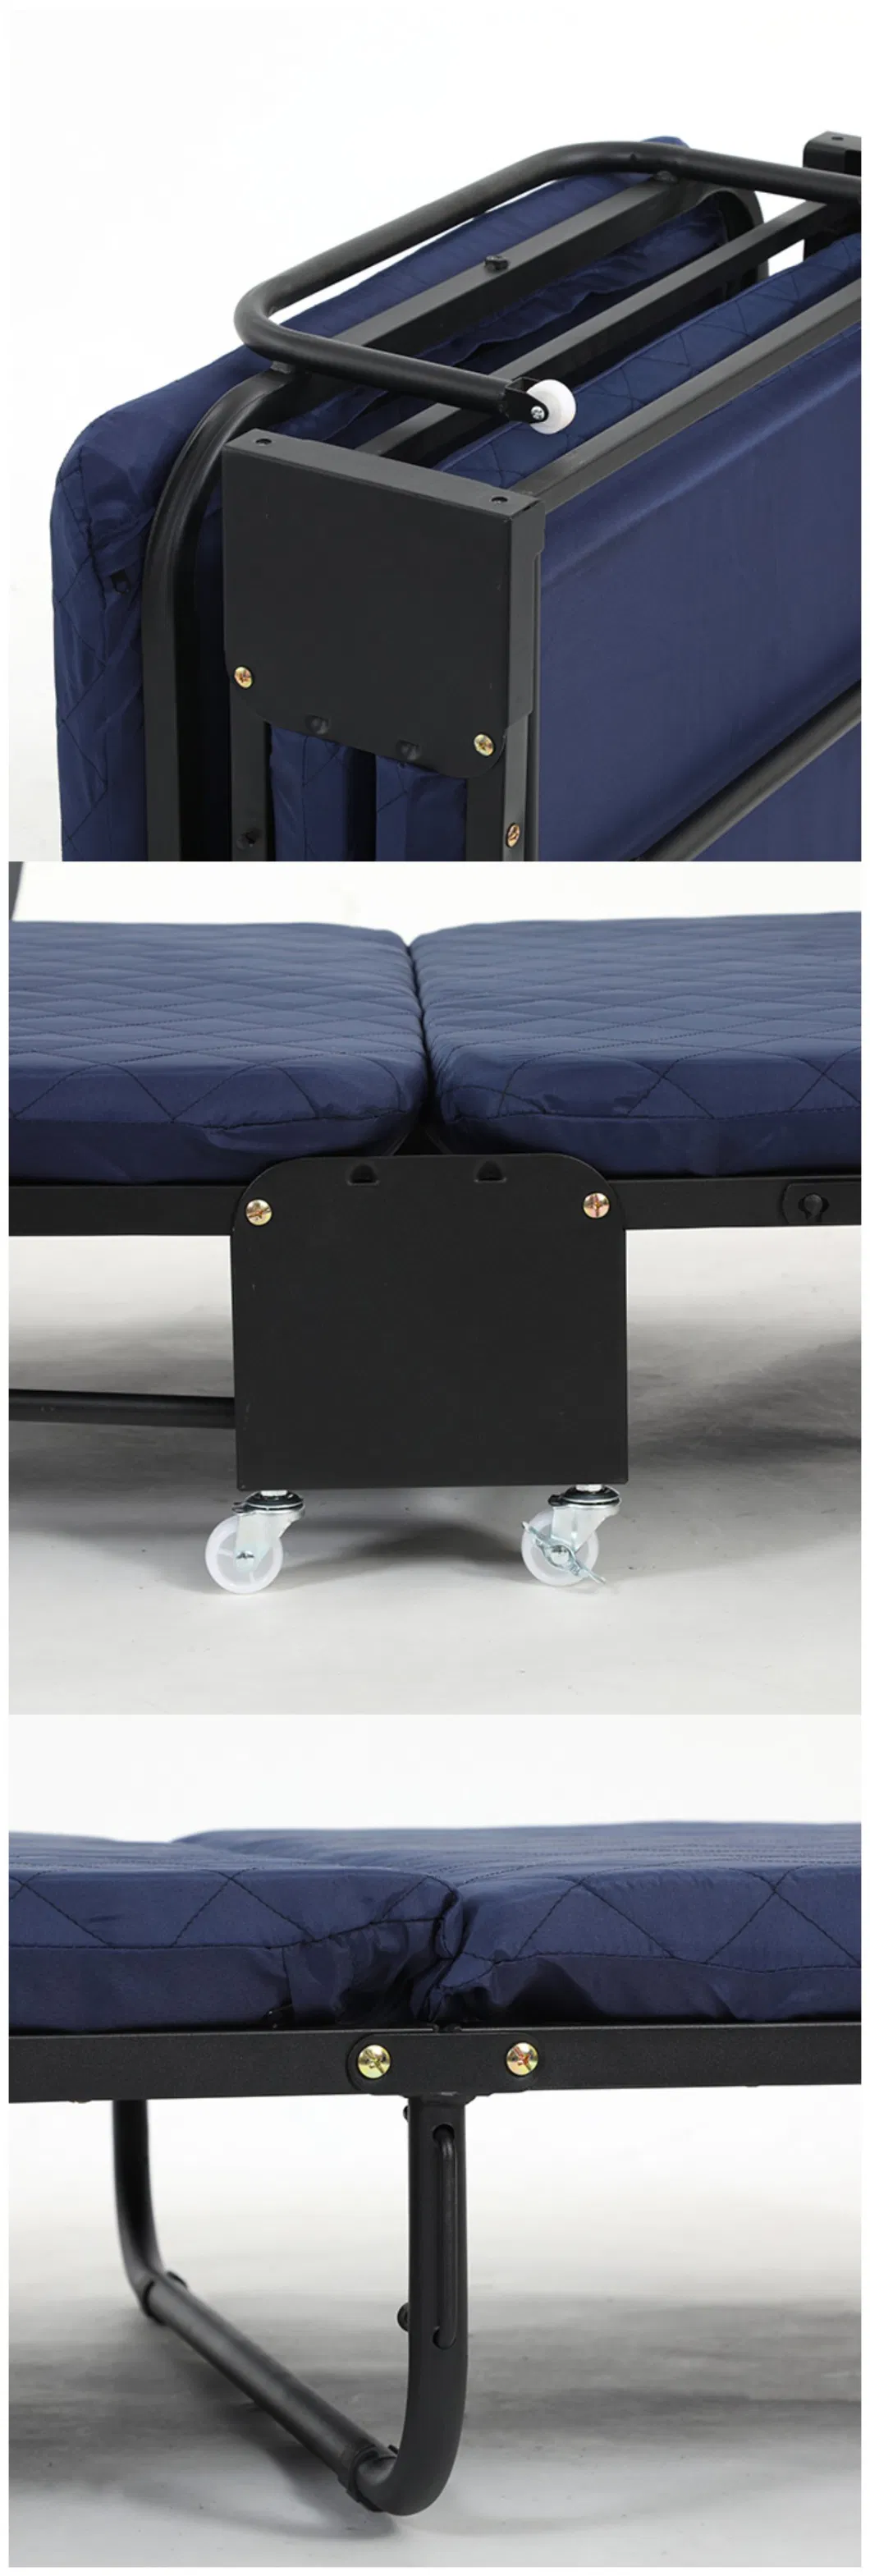 Modern Office Furniture Outdoor Steel Metal Iron Folding Camp Bed